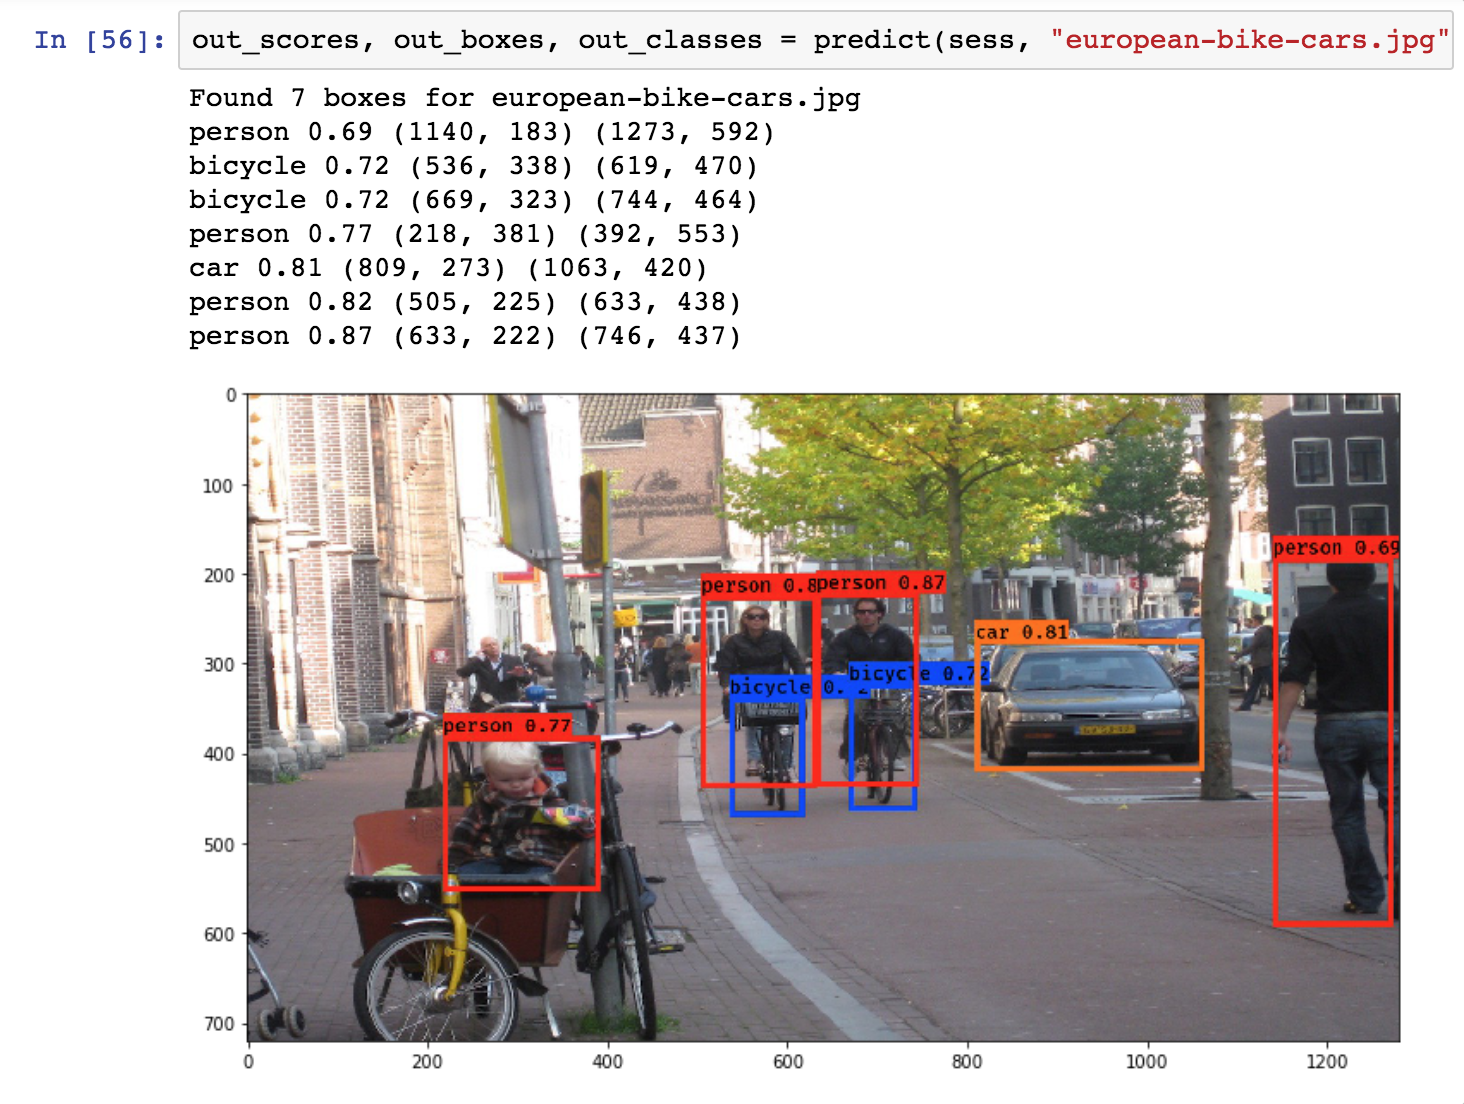 Object detection and localization